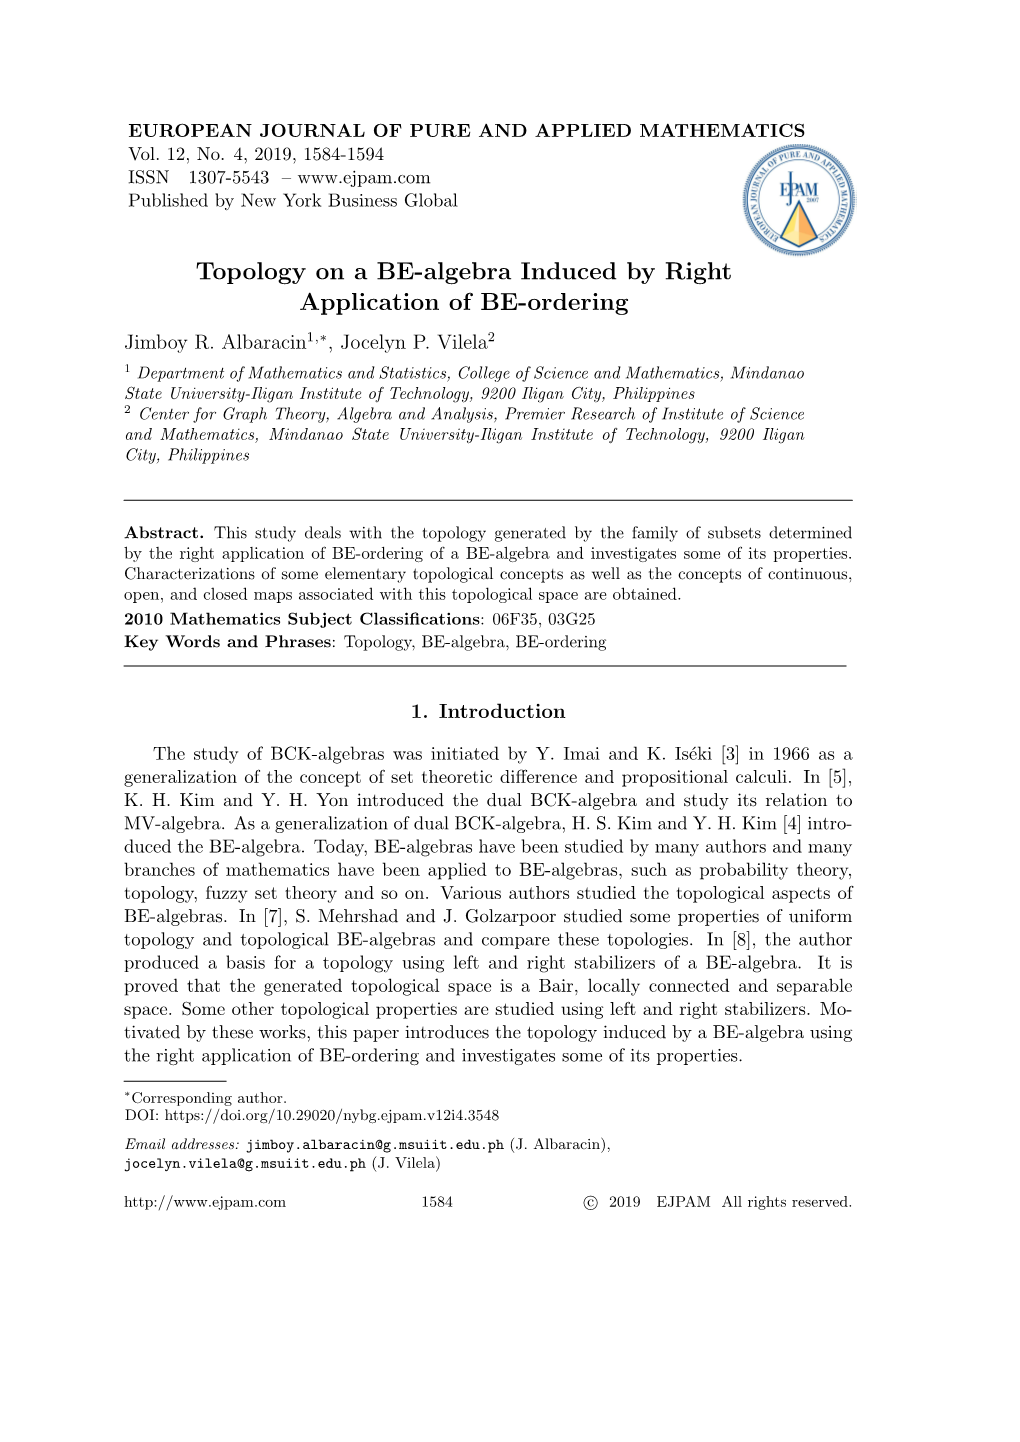 Topology on a BE-Algebra Induced by Right Application of BE-Ordering Jimboy R